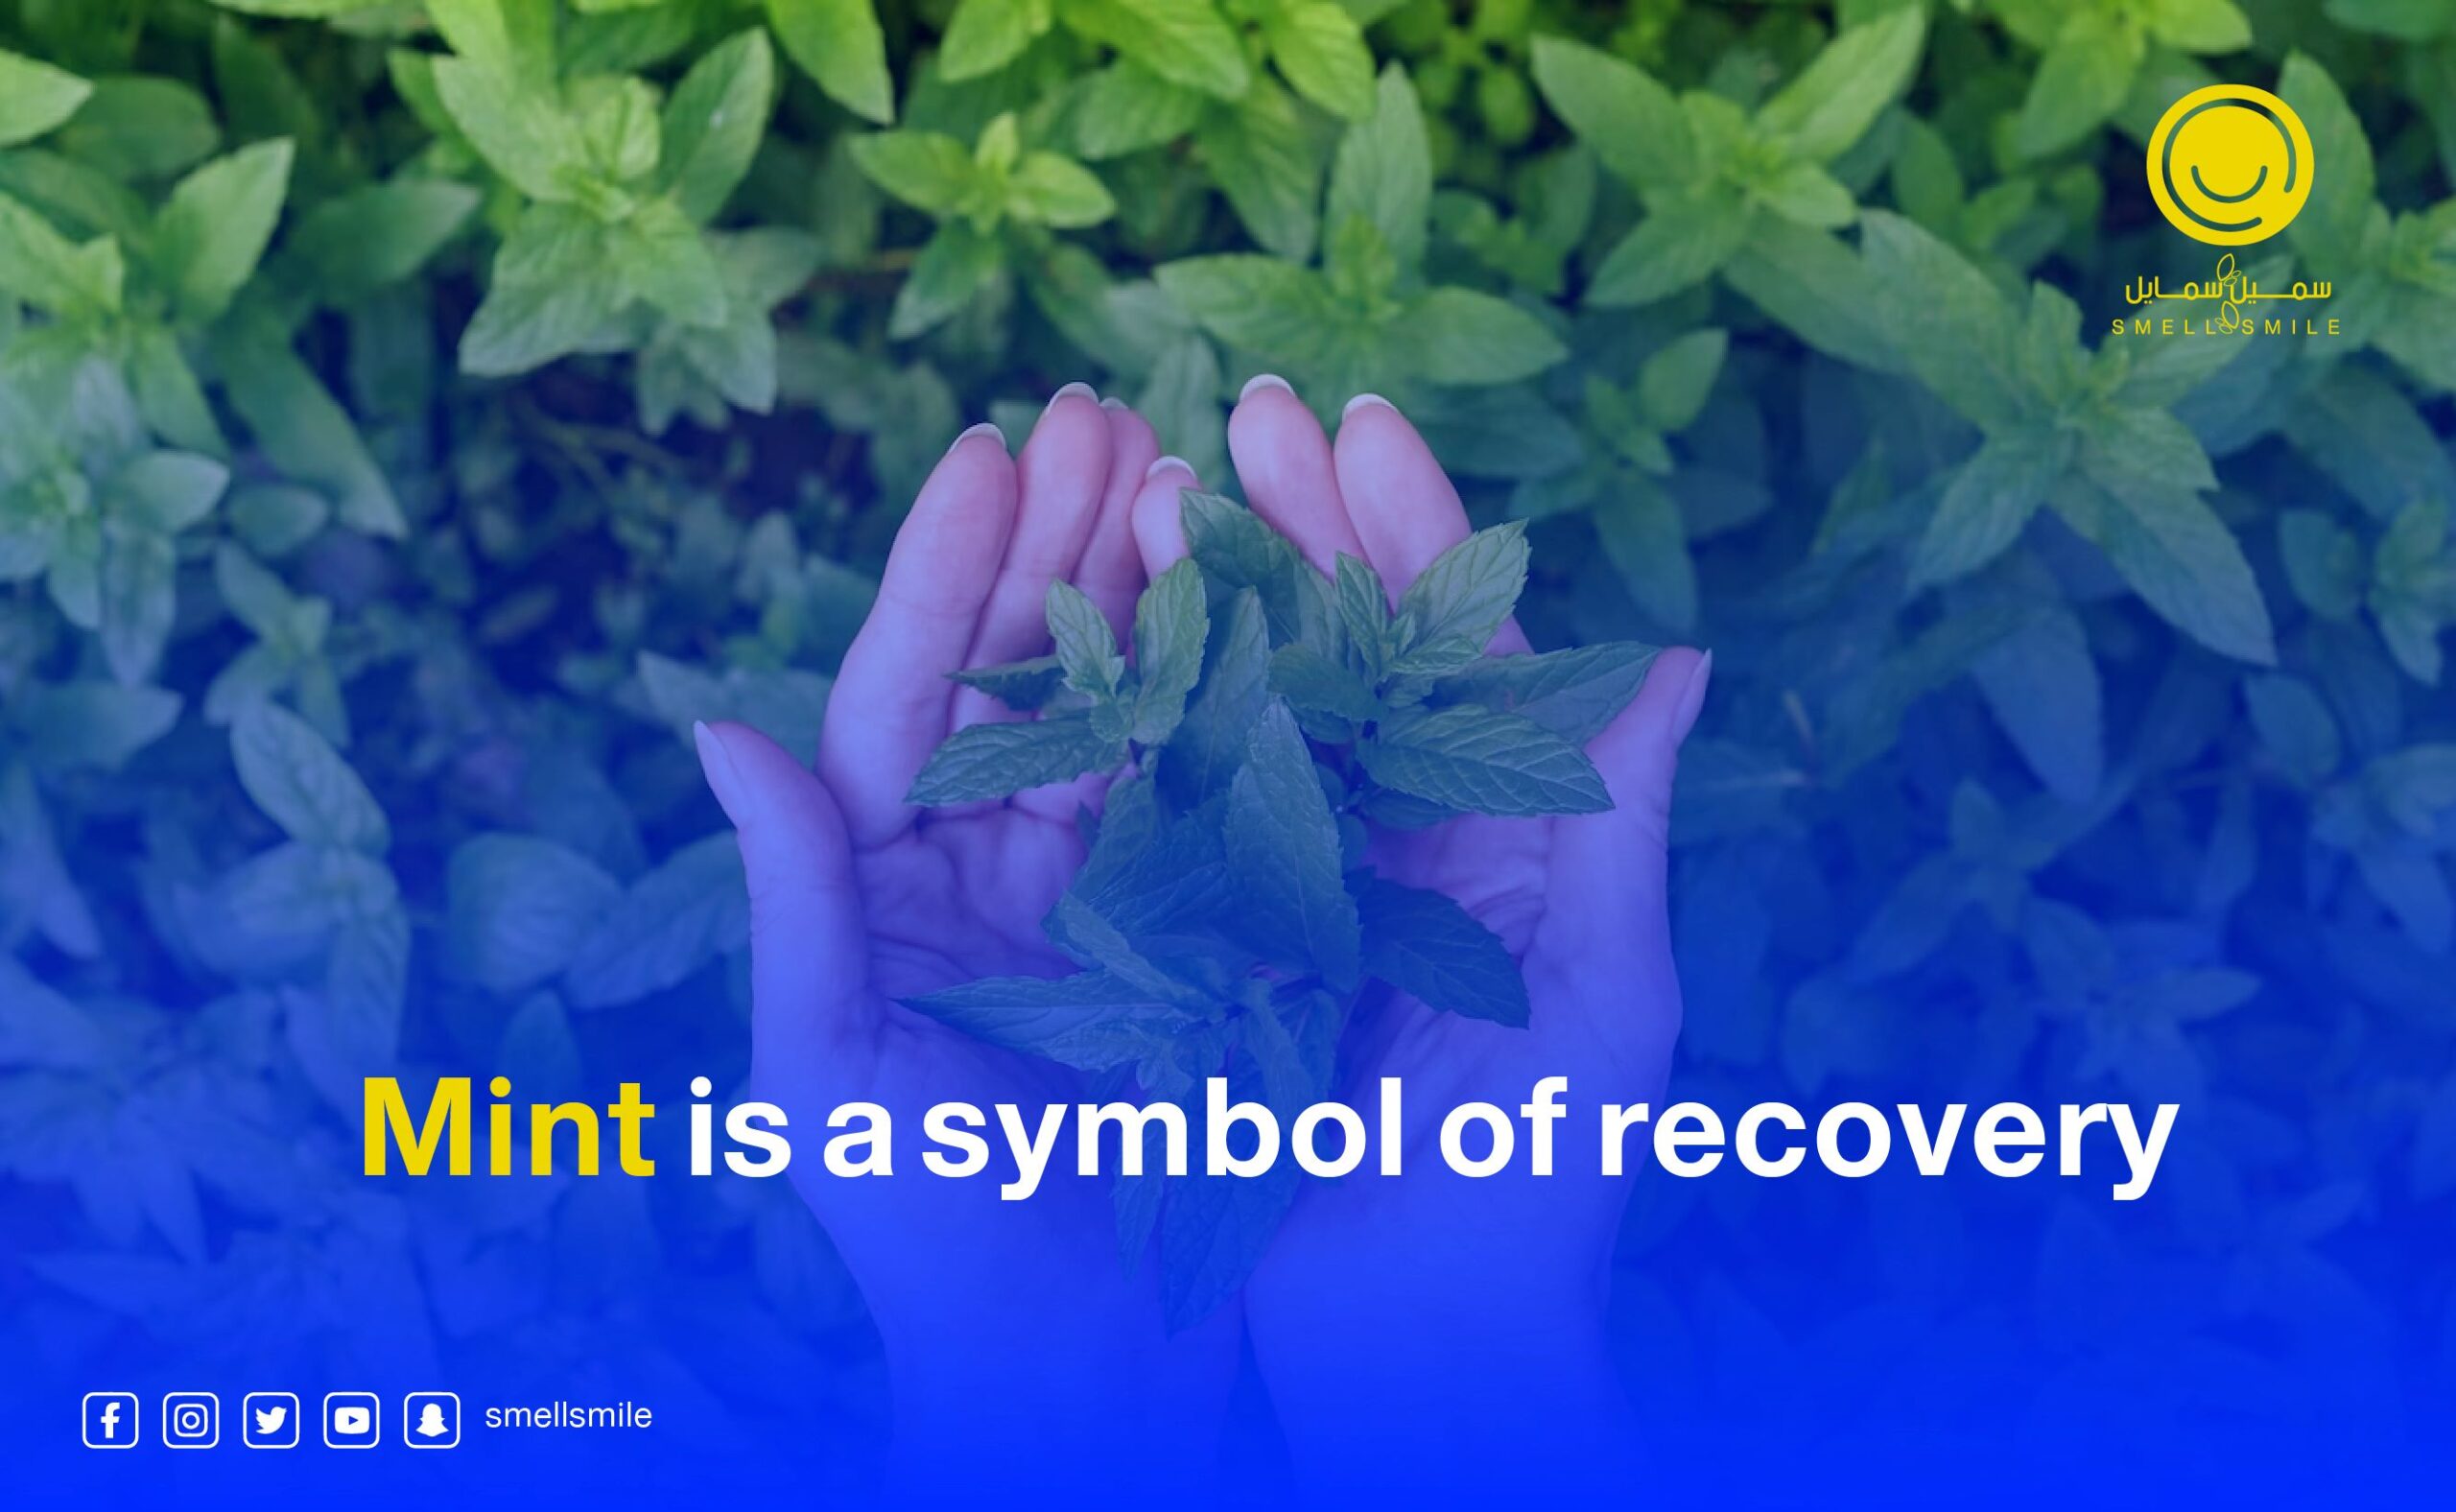 Mint is a symbol of recovery